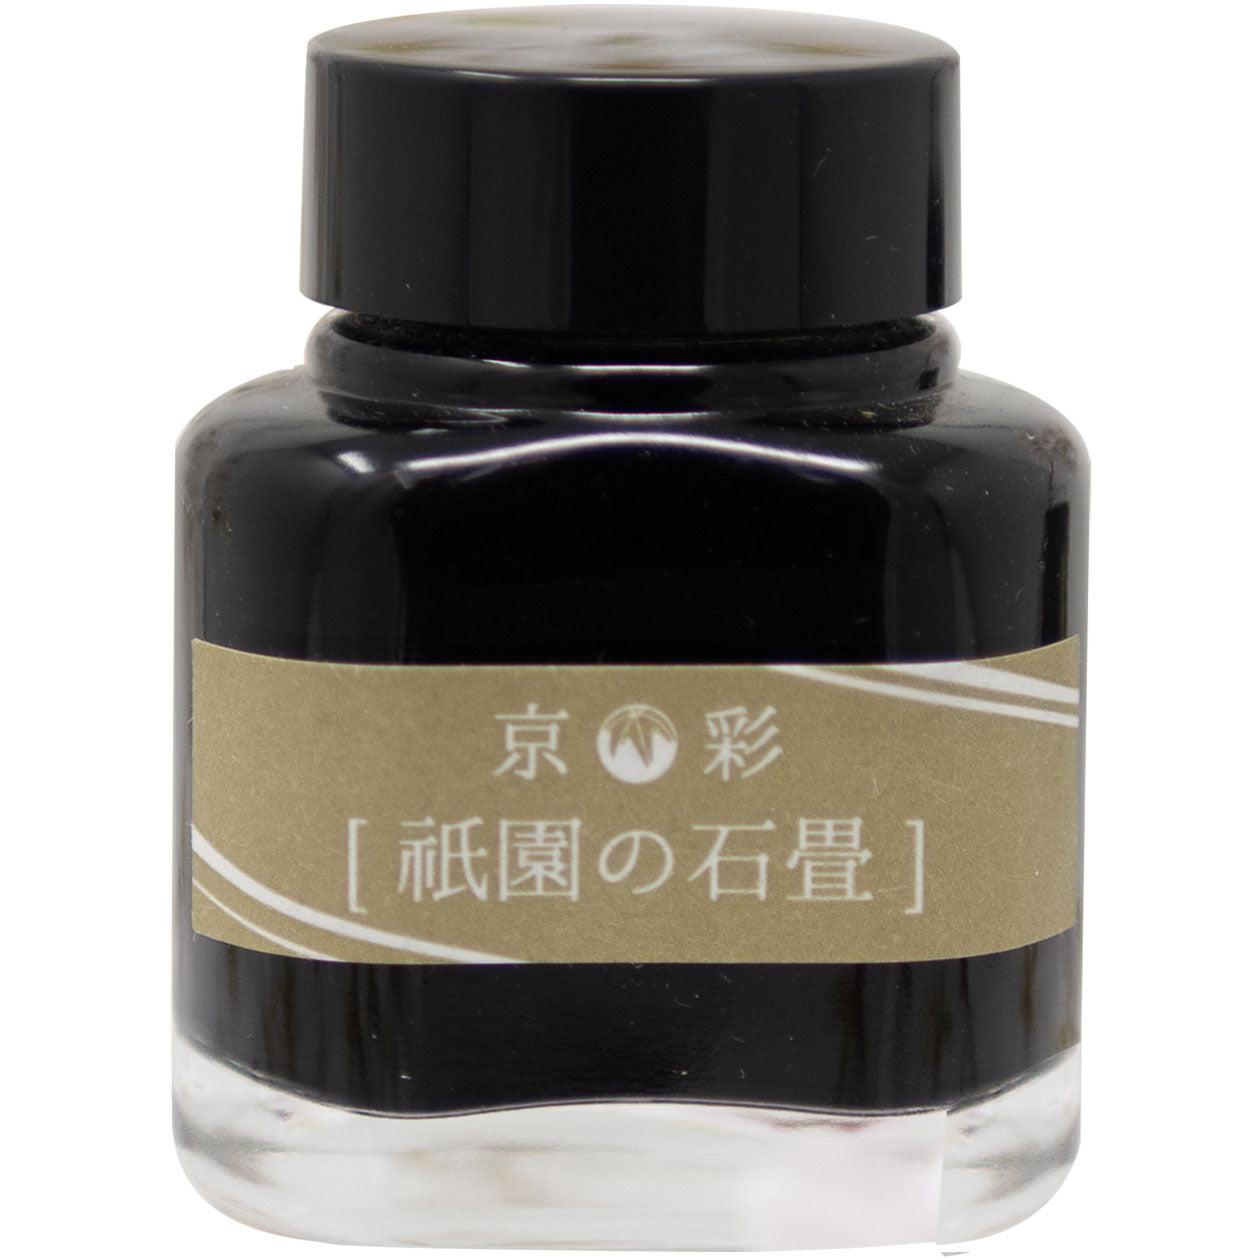 Kyoto Ink Bottle - Kyo-Iro - Stone Road of Gion